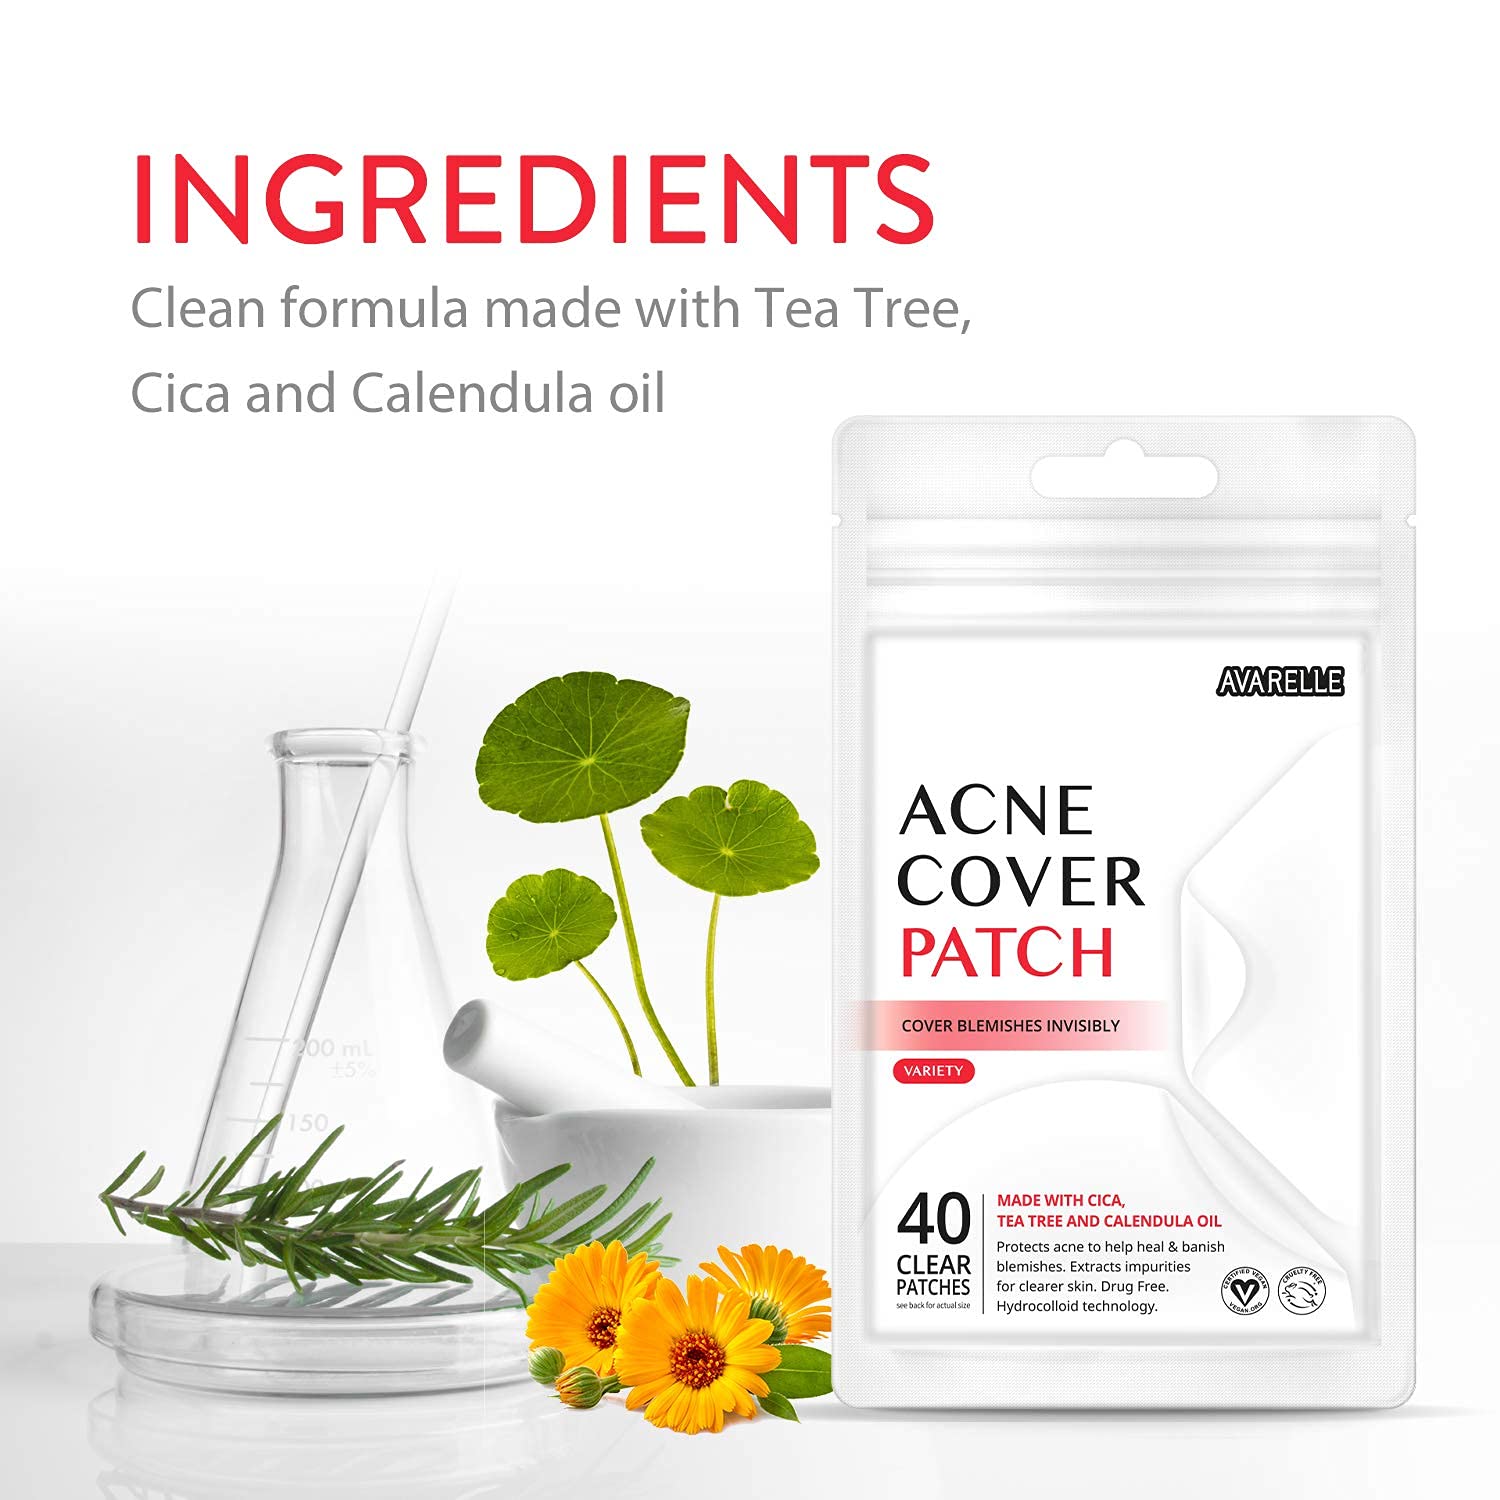 AVARELLE Pimple Patches Hydrocolloid Acne Patches, Acne Spot Treatment for Blemishes and Zit with Tea Tree Oil, Calendula Oil and Cica Oil for Face, Vegan, Cruelty Free (80 Count + Variety)